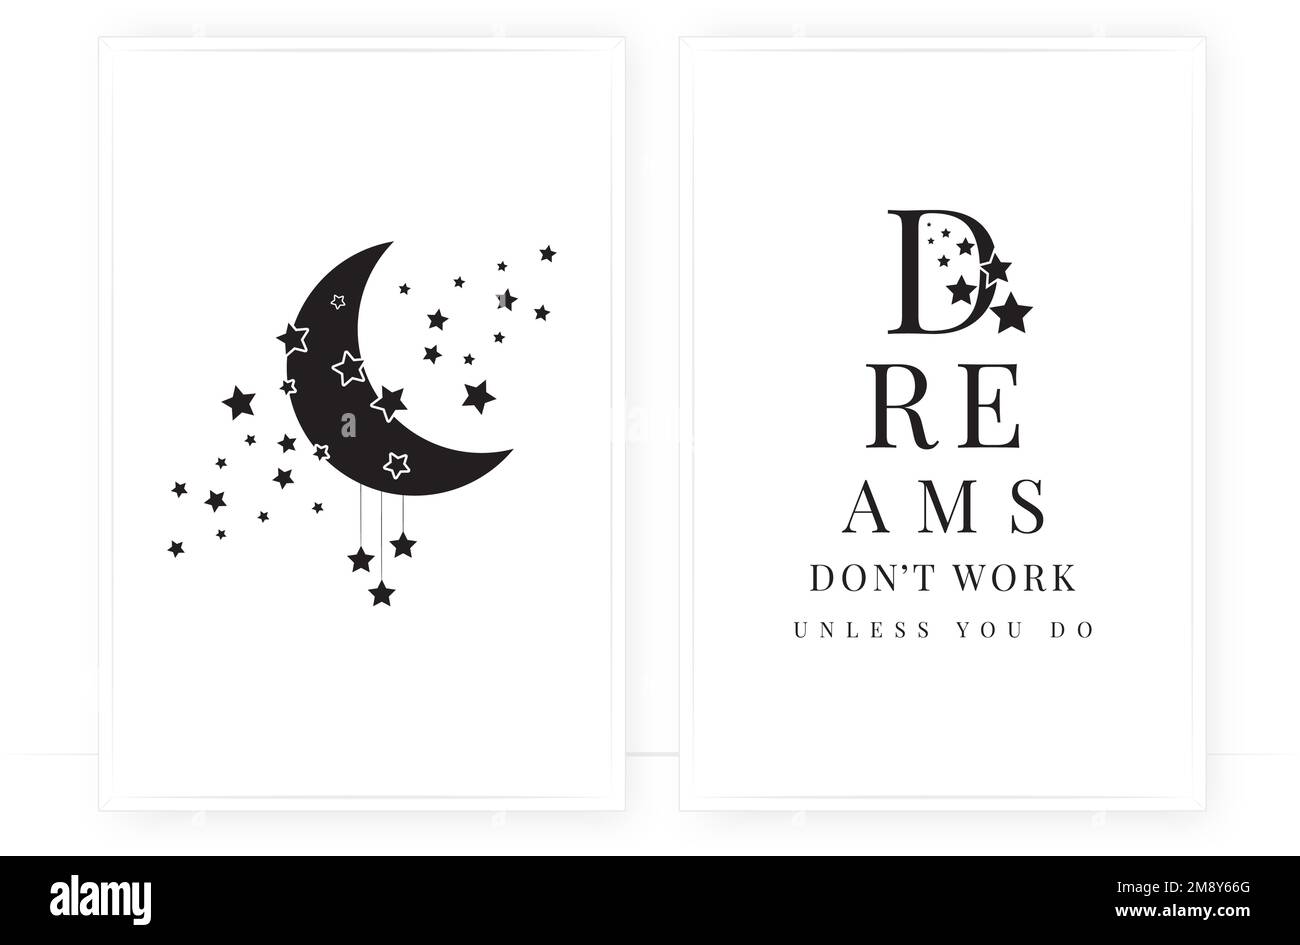 Dreams don't work unless you do, vector. Minimalist modern poster design in two pieces. Moon illustration. Black and white art design Stock Vector